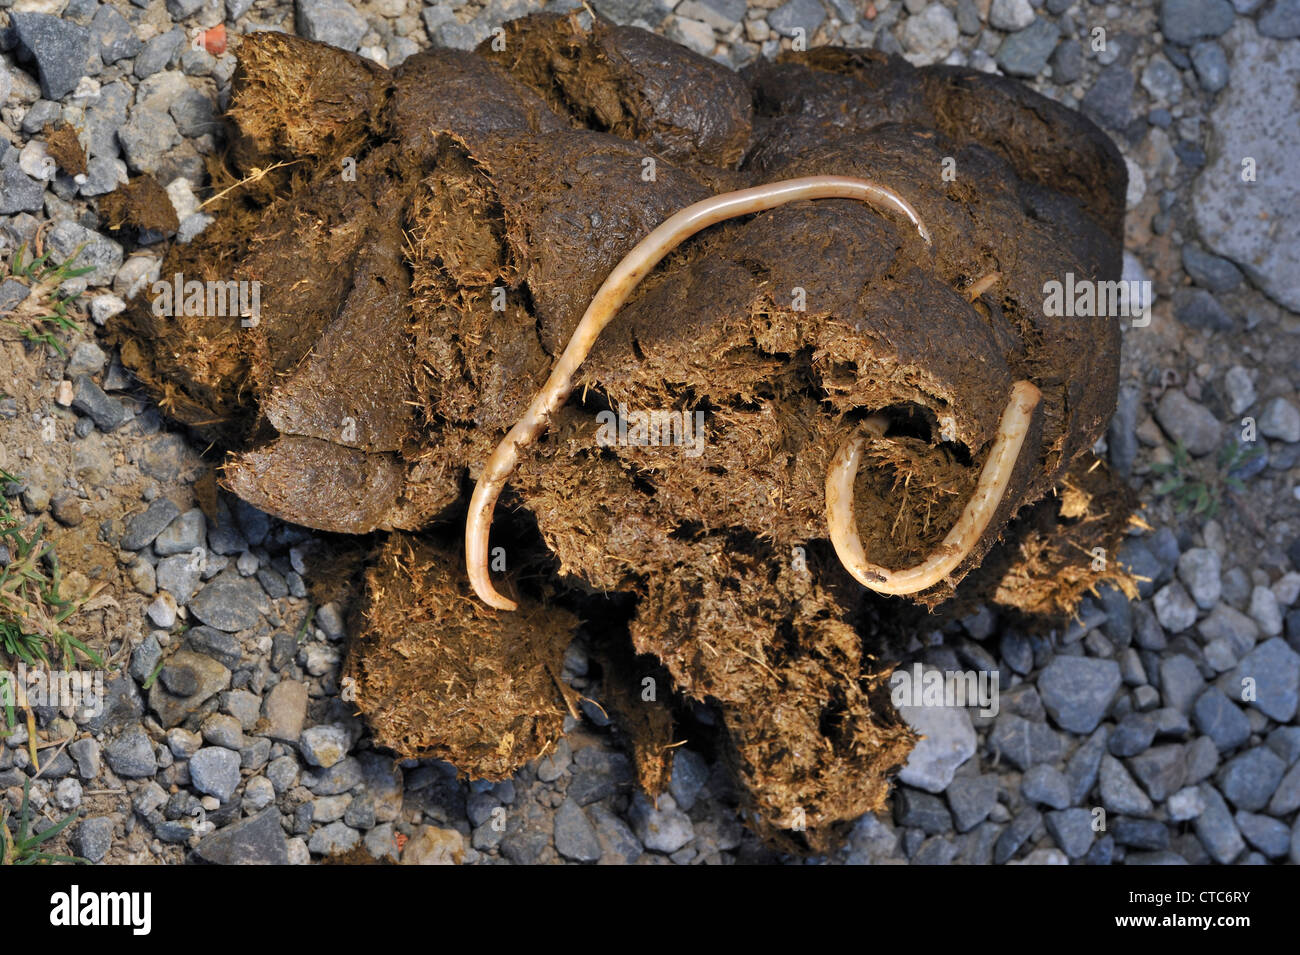 Horse roundworms / Equine roundworms (Parascaris equorum) in horse dung Stock Photo